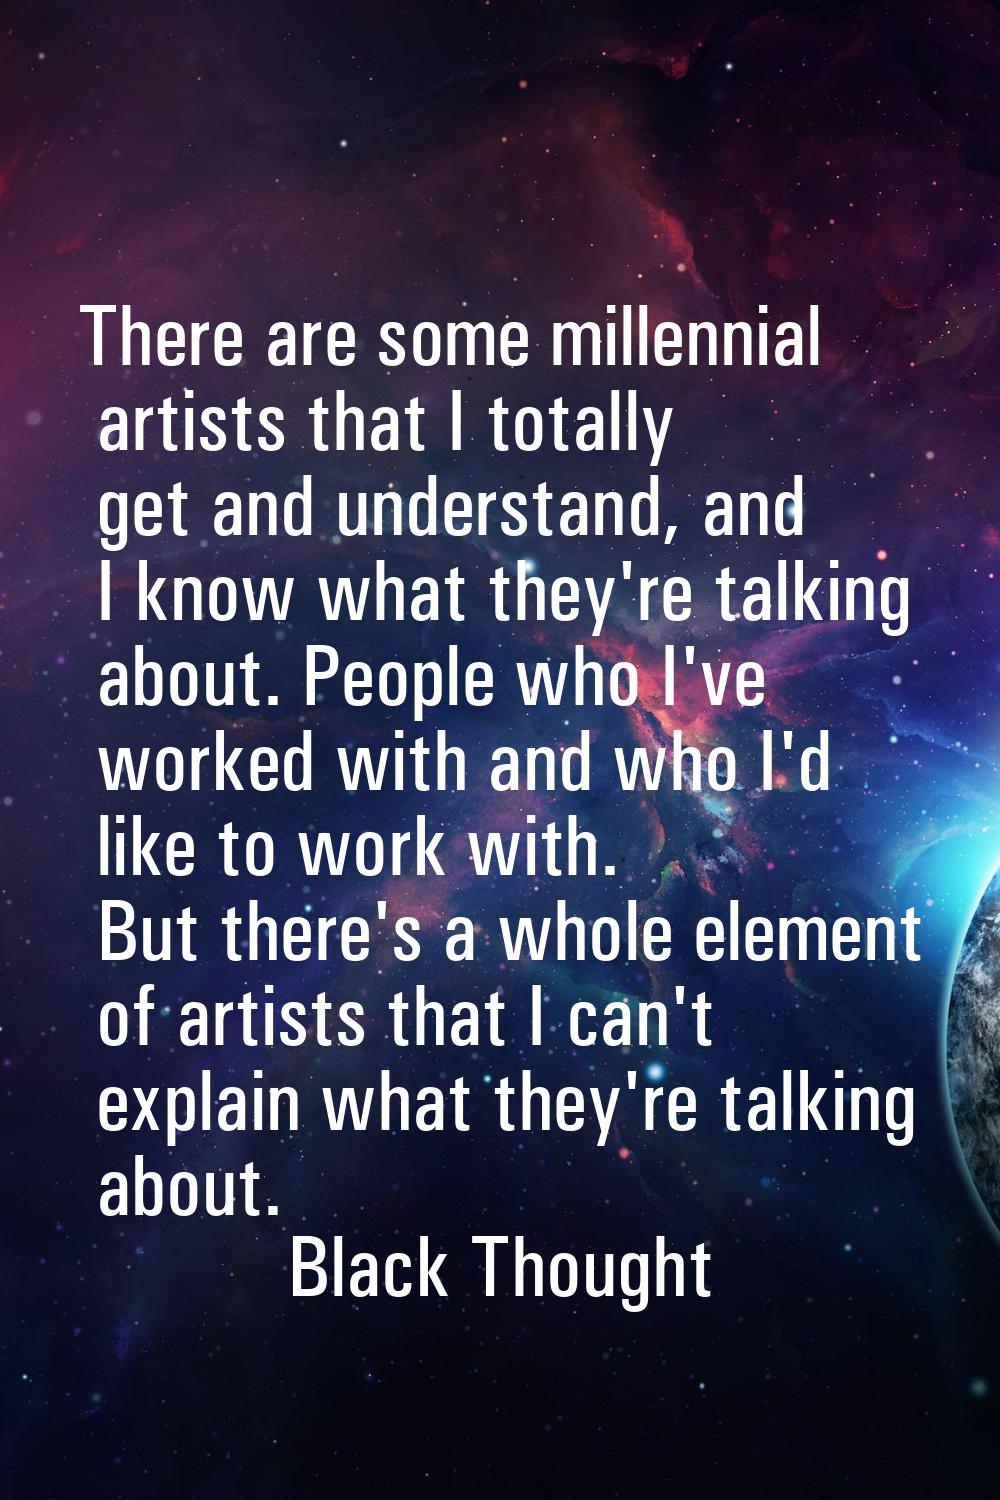 There are some millennial artists that I totally get and understand, and I know what they're talkin